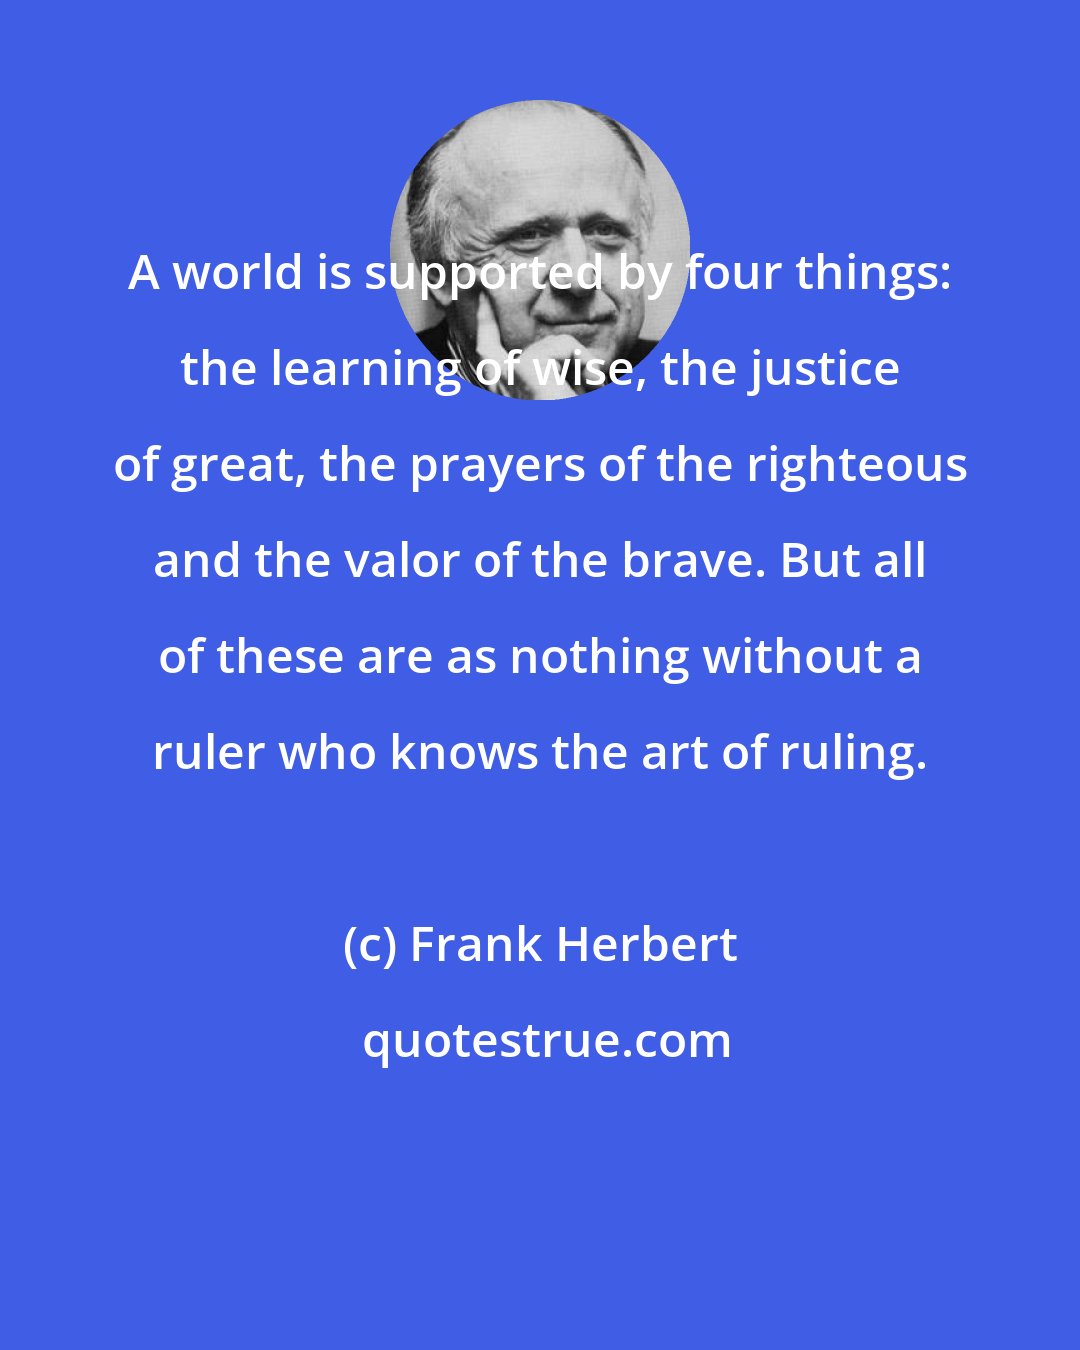 Frank Herbert: A world is supported by four things: the learning of wise, the justice of great, the prayers of the righteous and the valor of the brave. But all of these are as nothing without a ruler who knows the art of ruling.